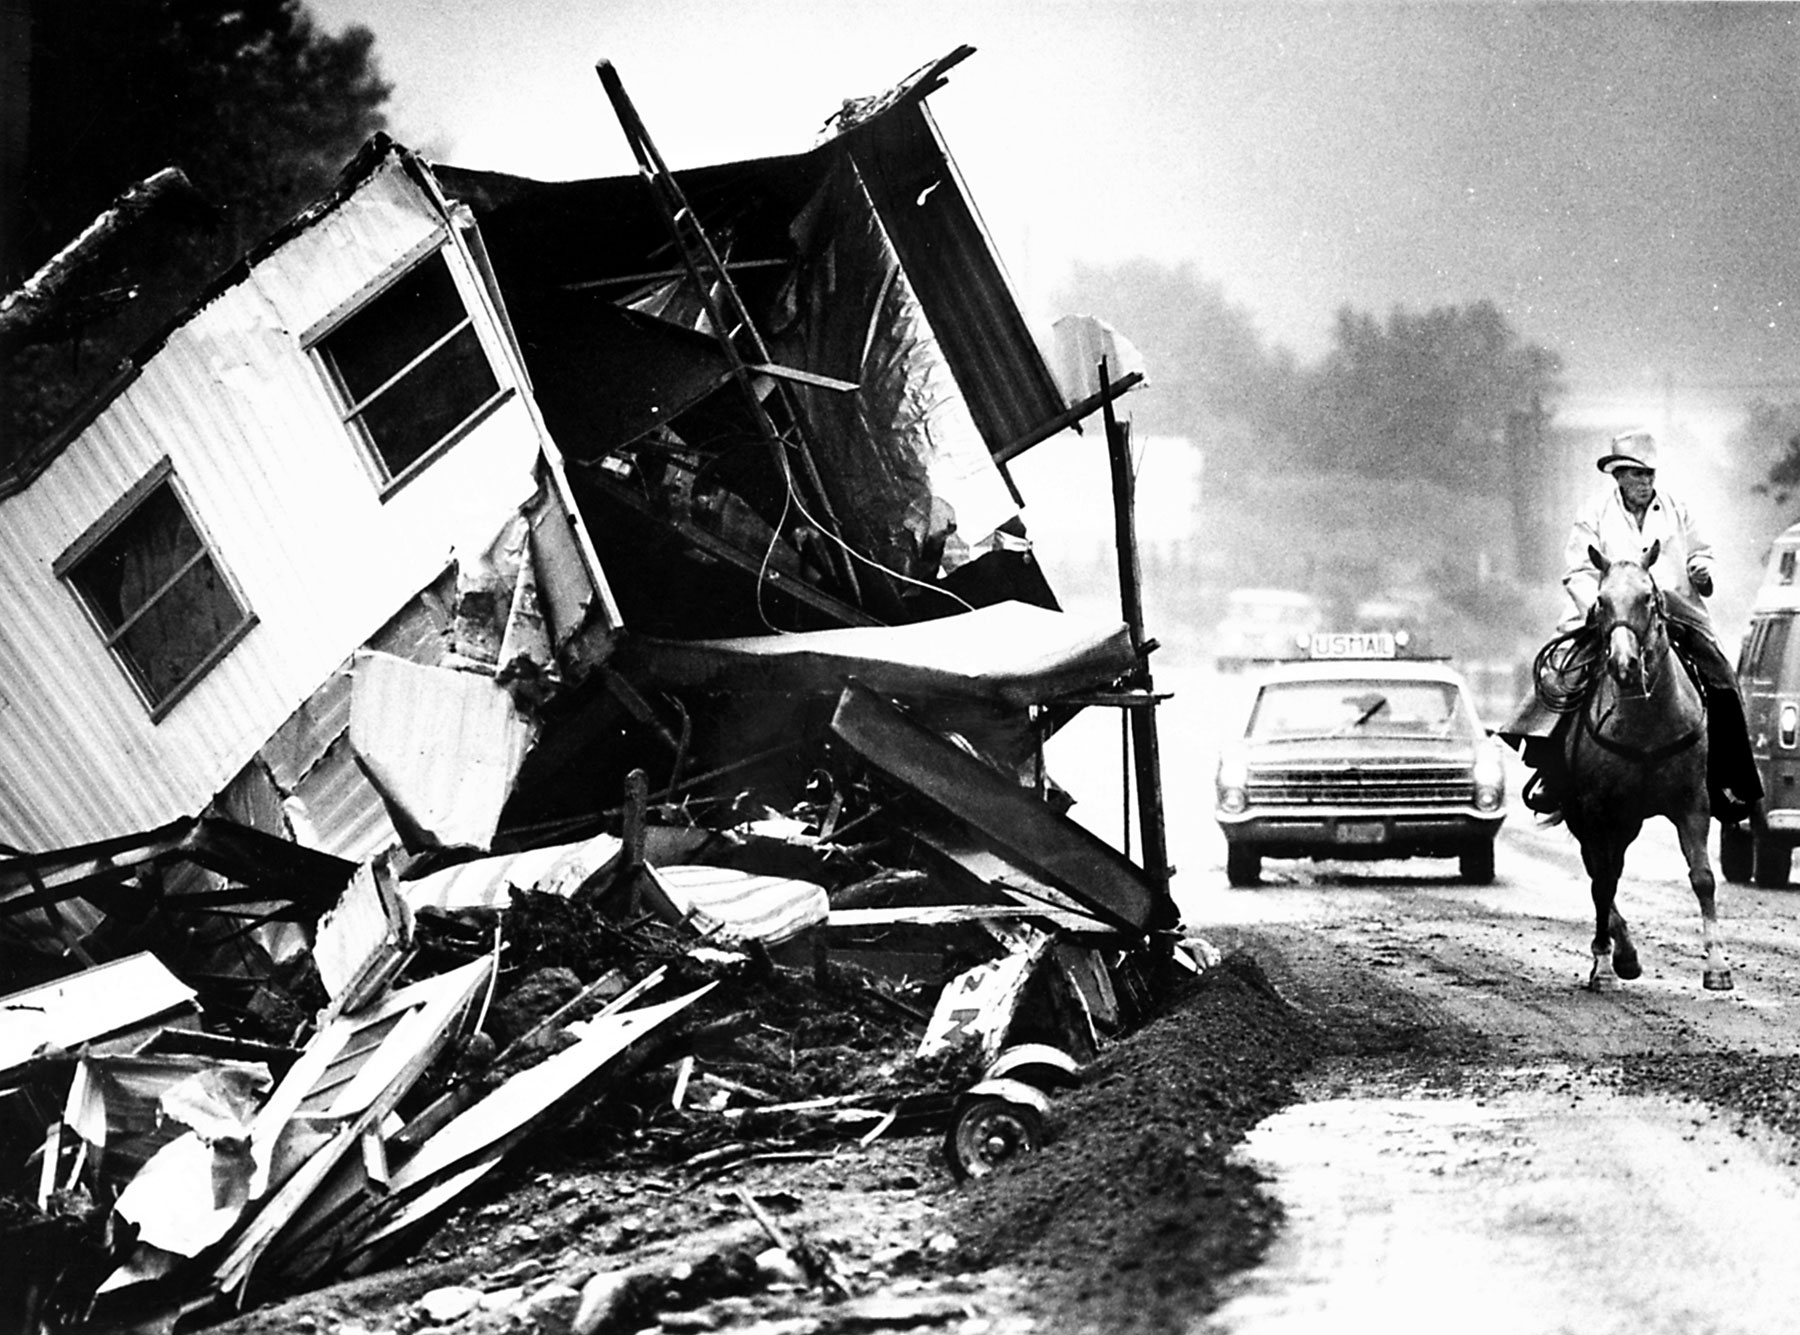 The Big Thompson flood of 1976 was the deadliest flash flood in Colorado’s recorded history.  Source - Denver Post. The Archive. July 31, 2012.  Photo by Steve Larson.